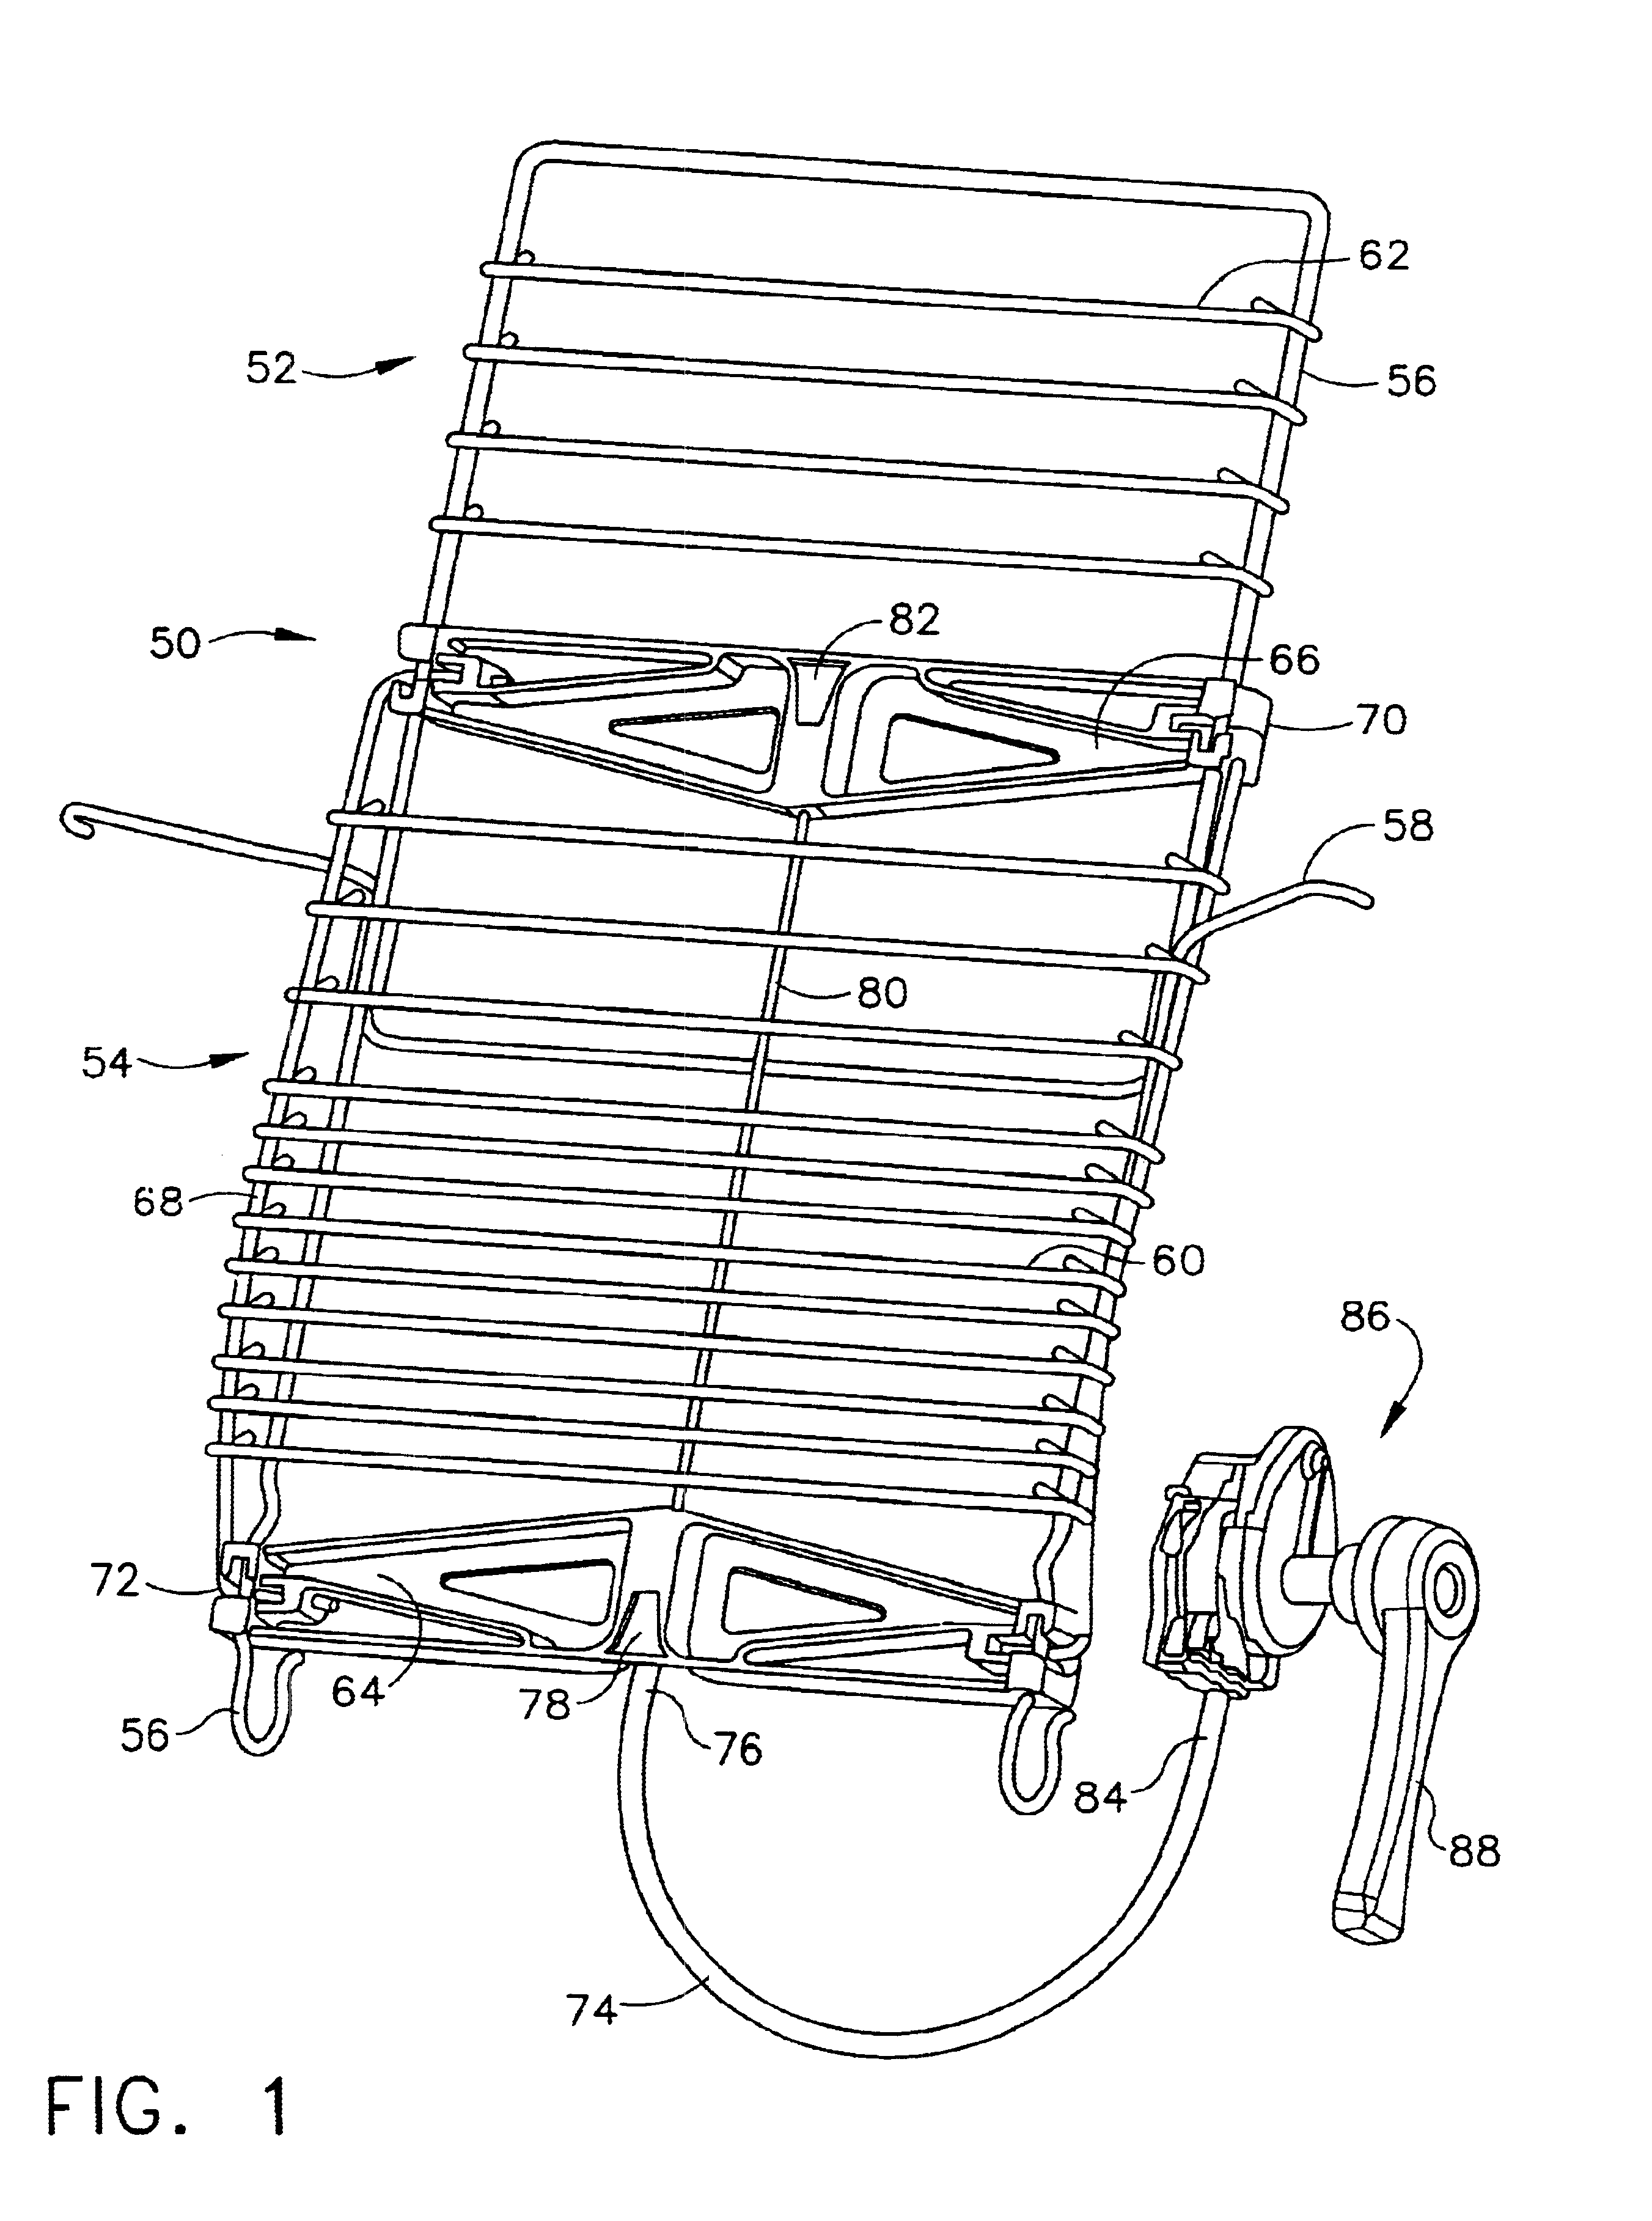 Apparatus and method for thin profile ratchet actuator